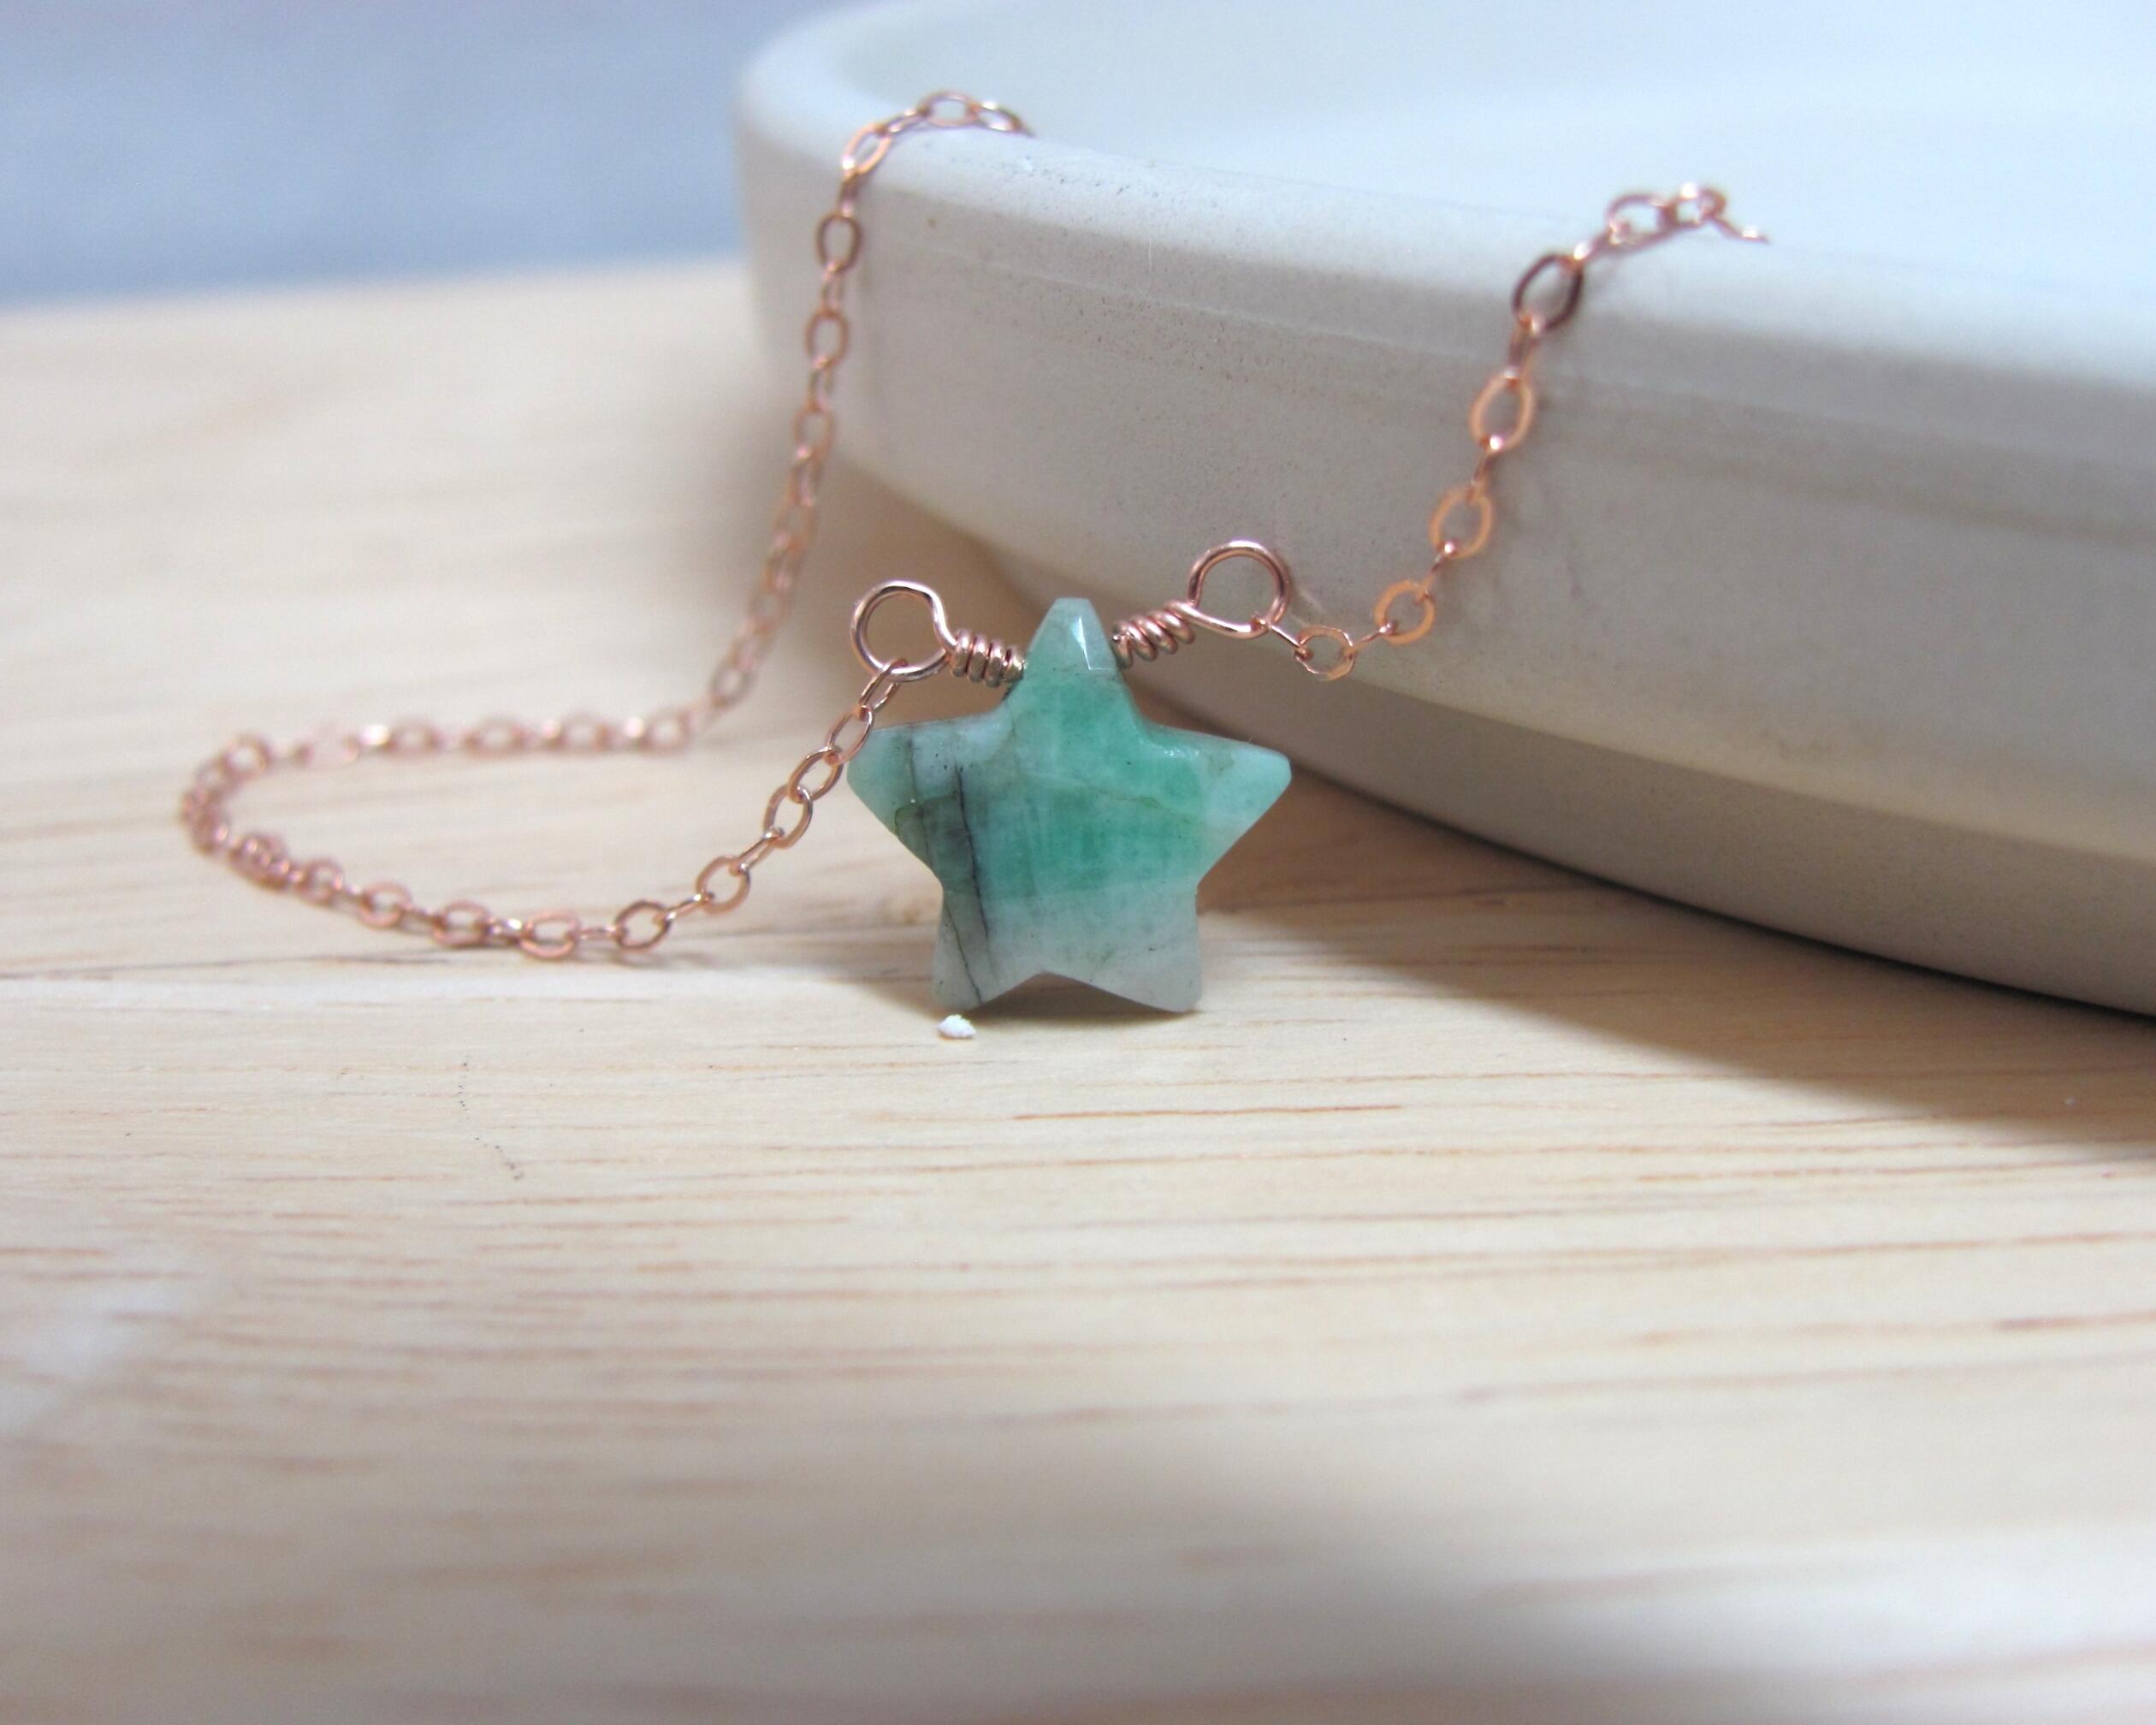 Celestial Star Necklace with Raw Emerald Gemstones